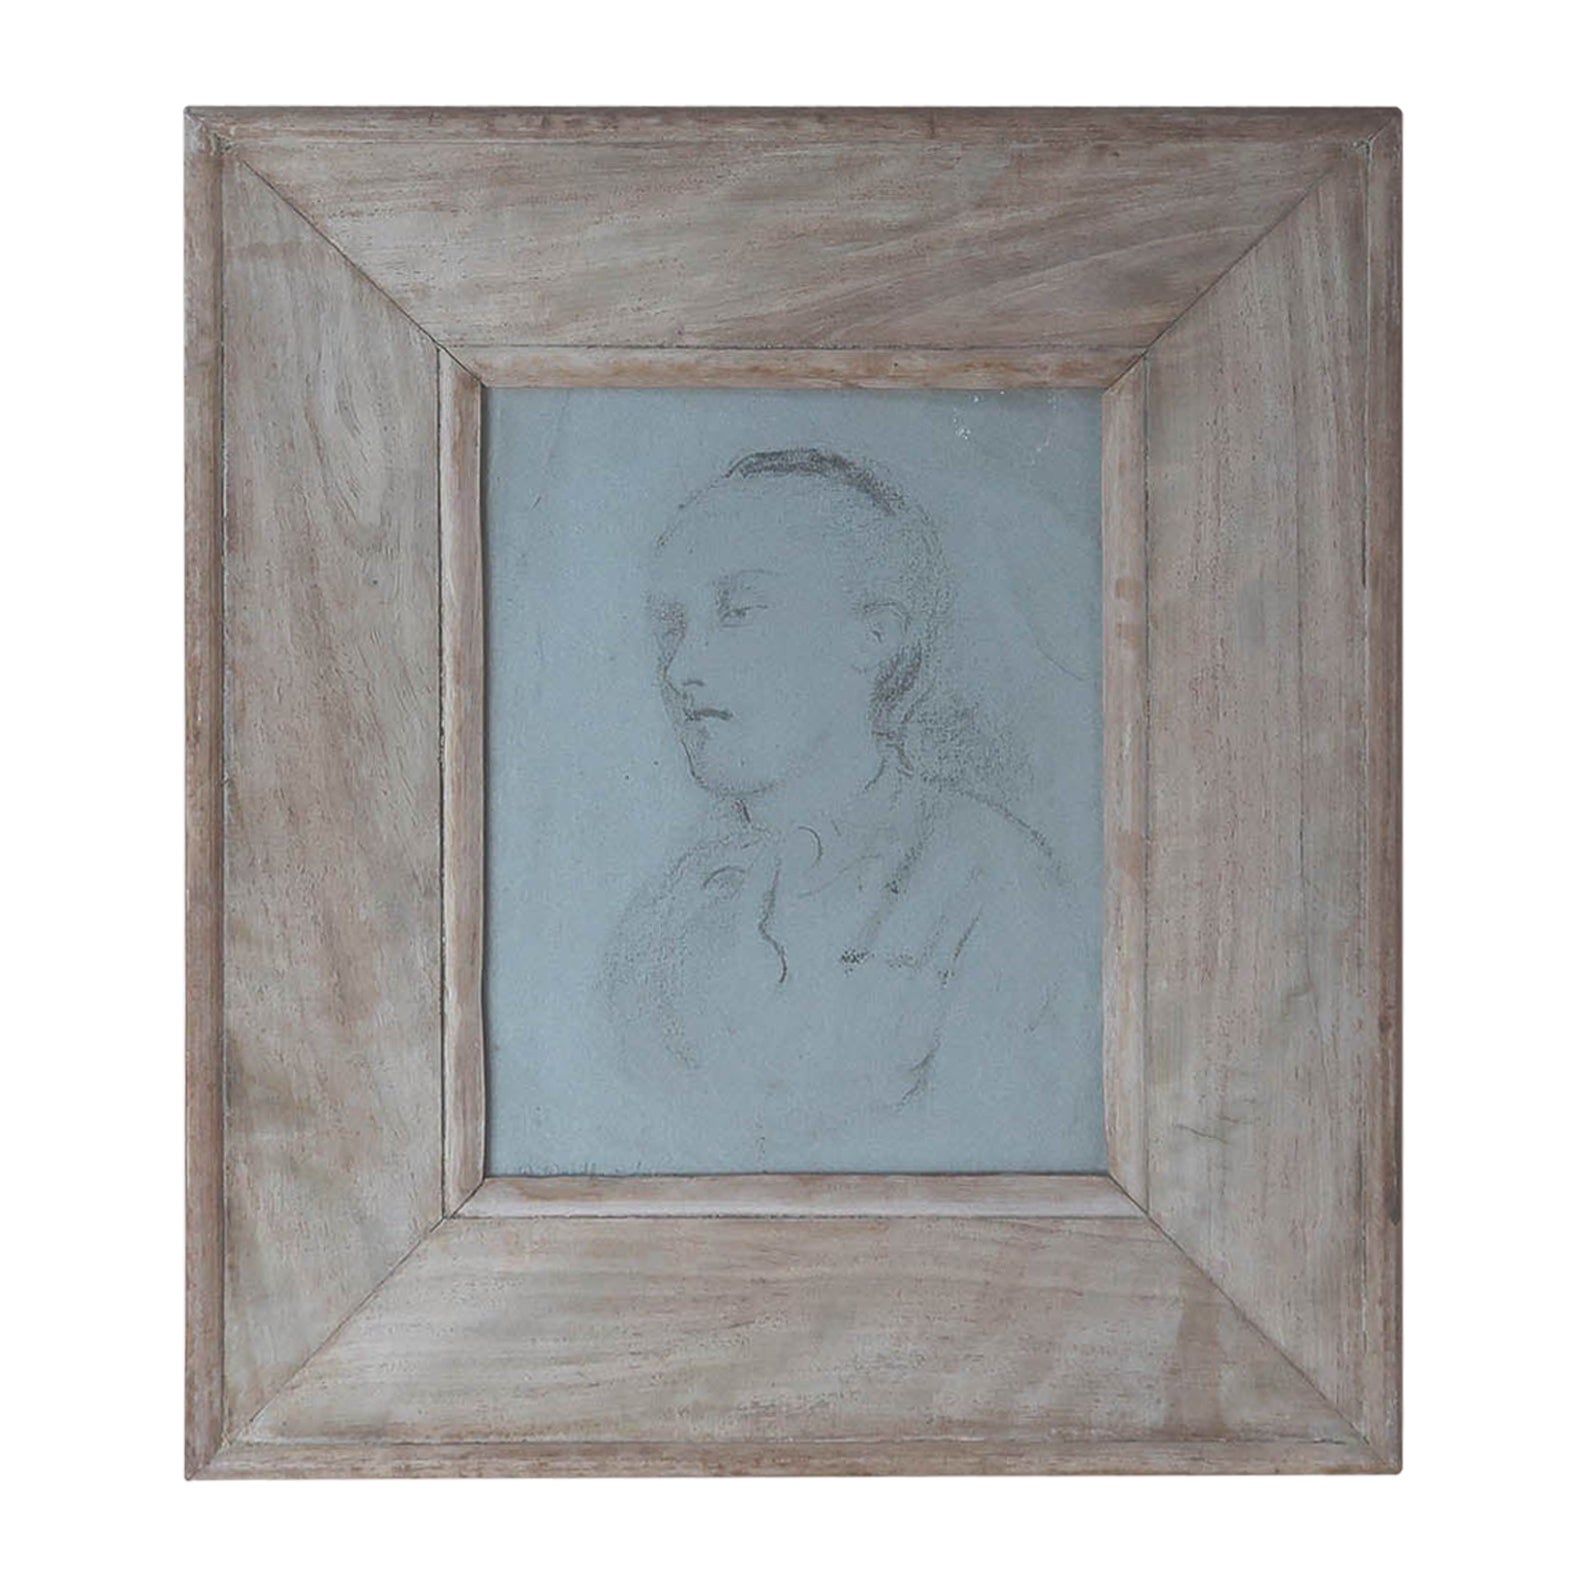 Charcoal Drawing on Blue Paper By William Wardlaw Laing, C.1880 For Sale